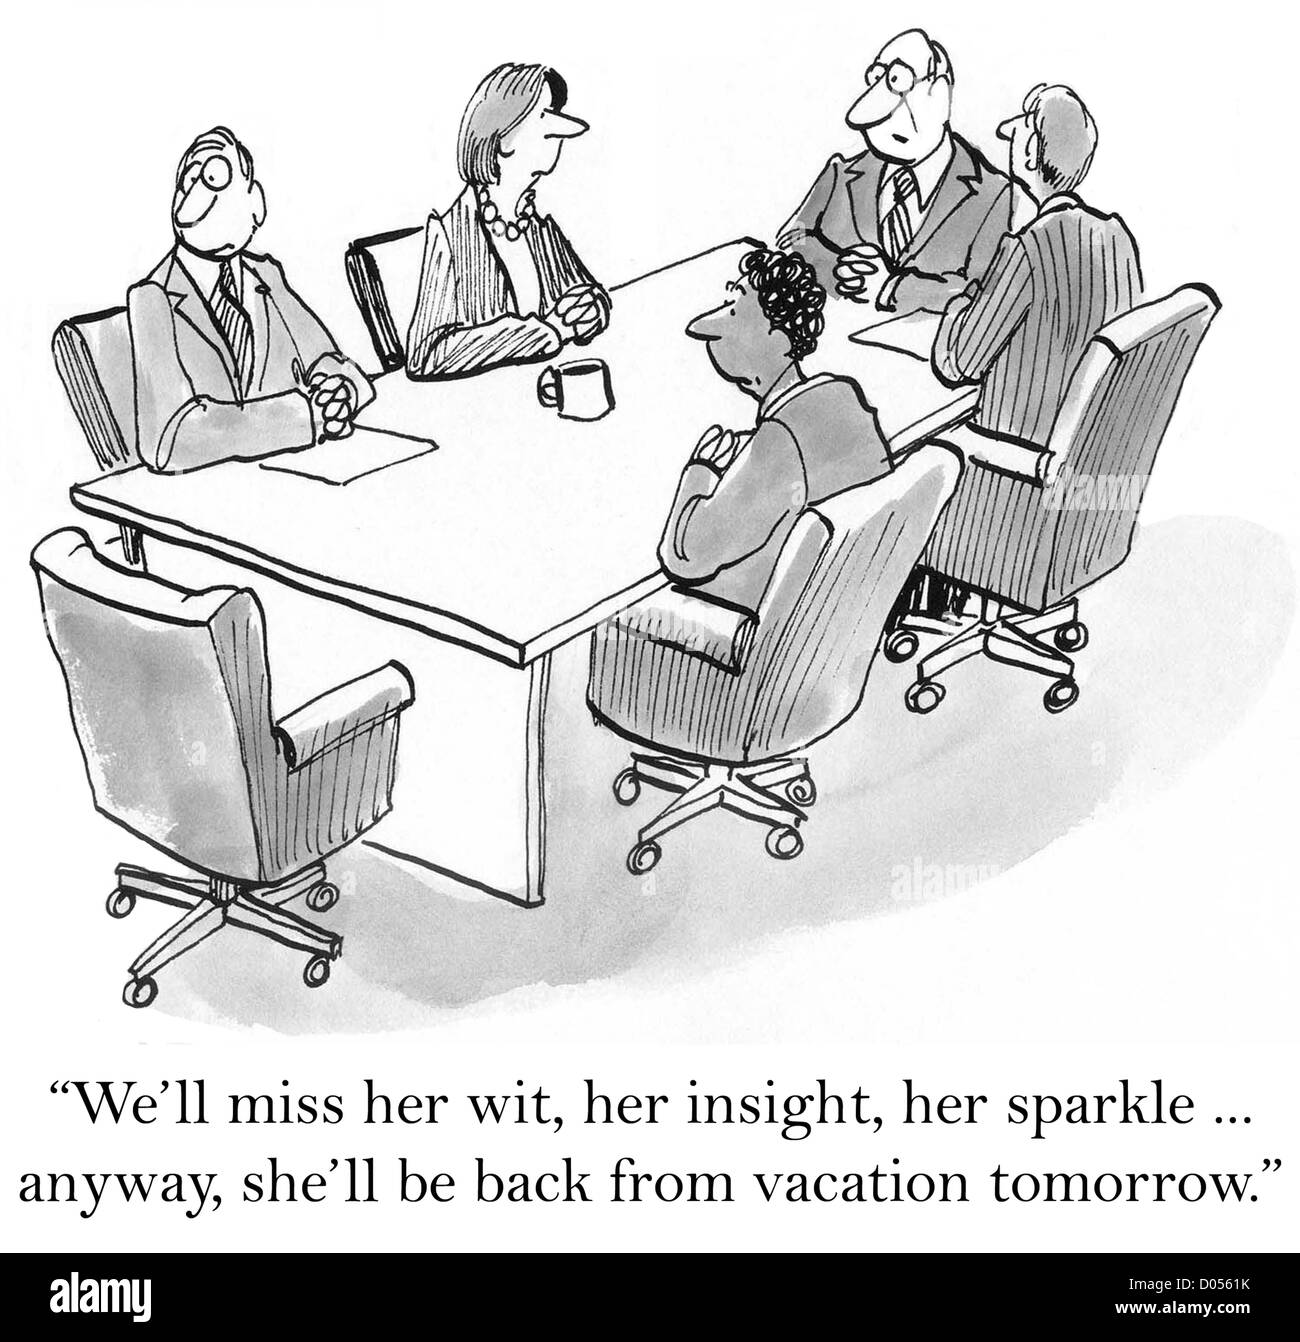 "We'll miss her wit, her insight, her sparkle... anyway, she'll be back from vacation tomorrow." Stock Photo